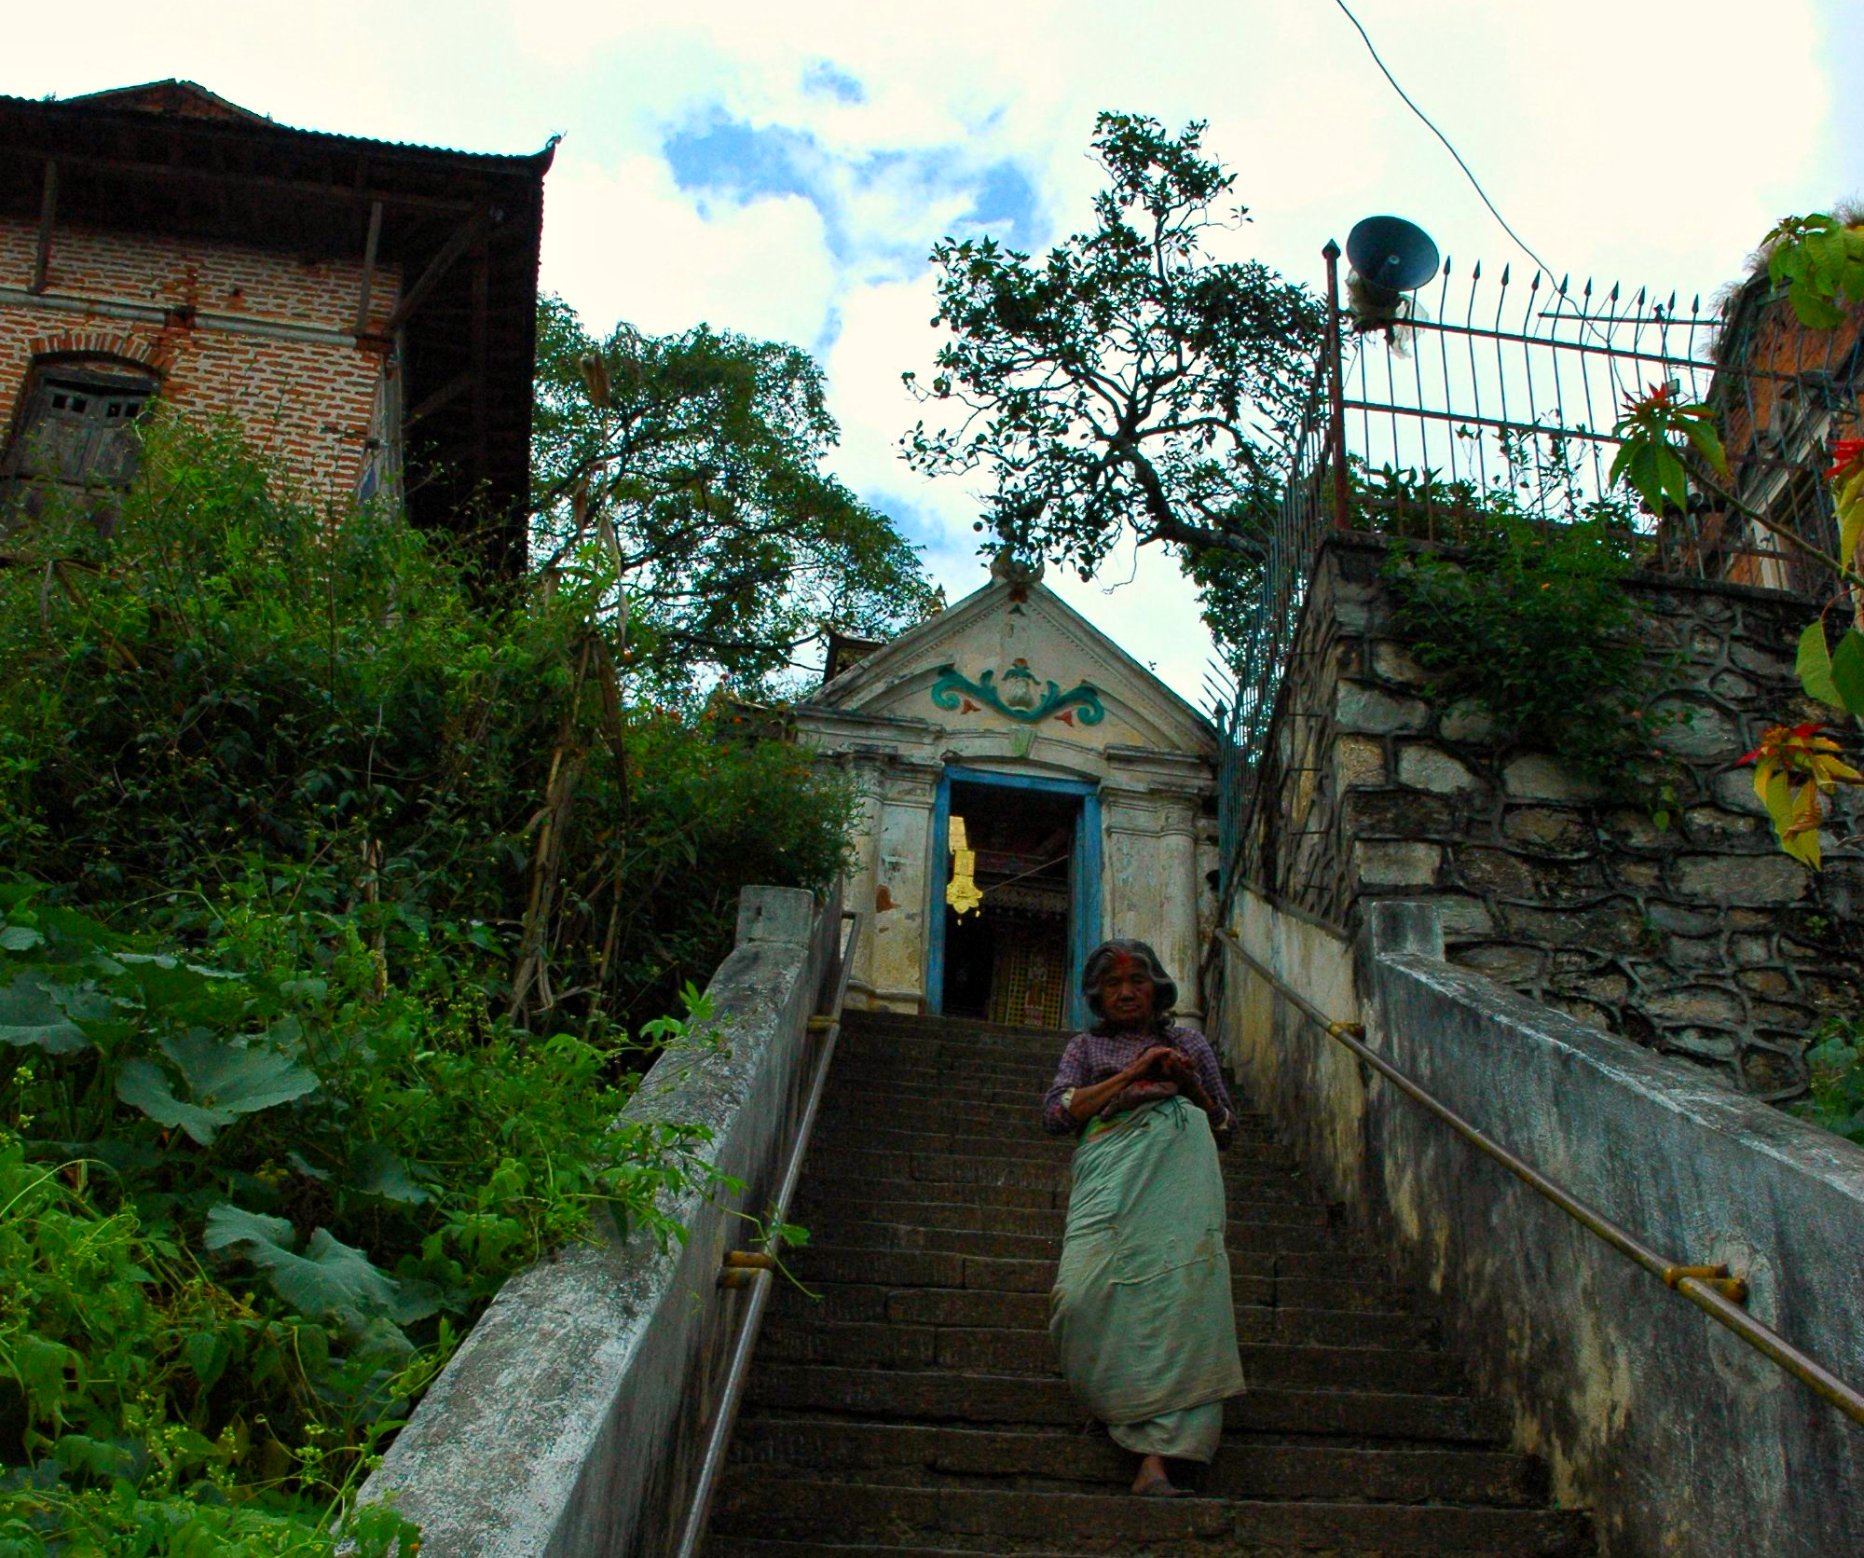 a person walking down the stairs of an old building